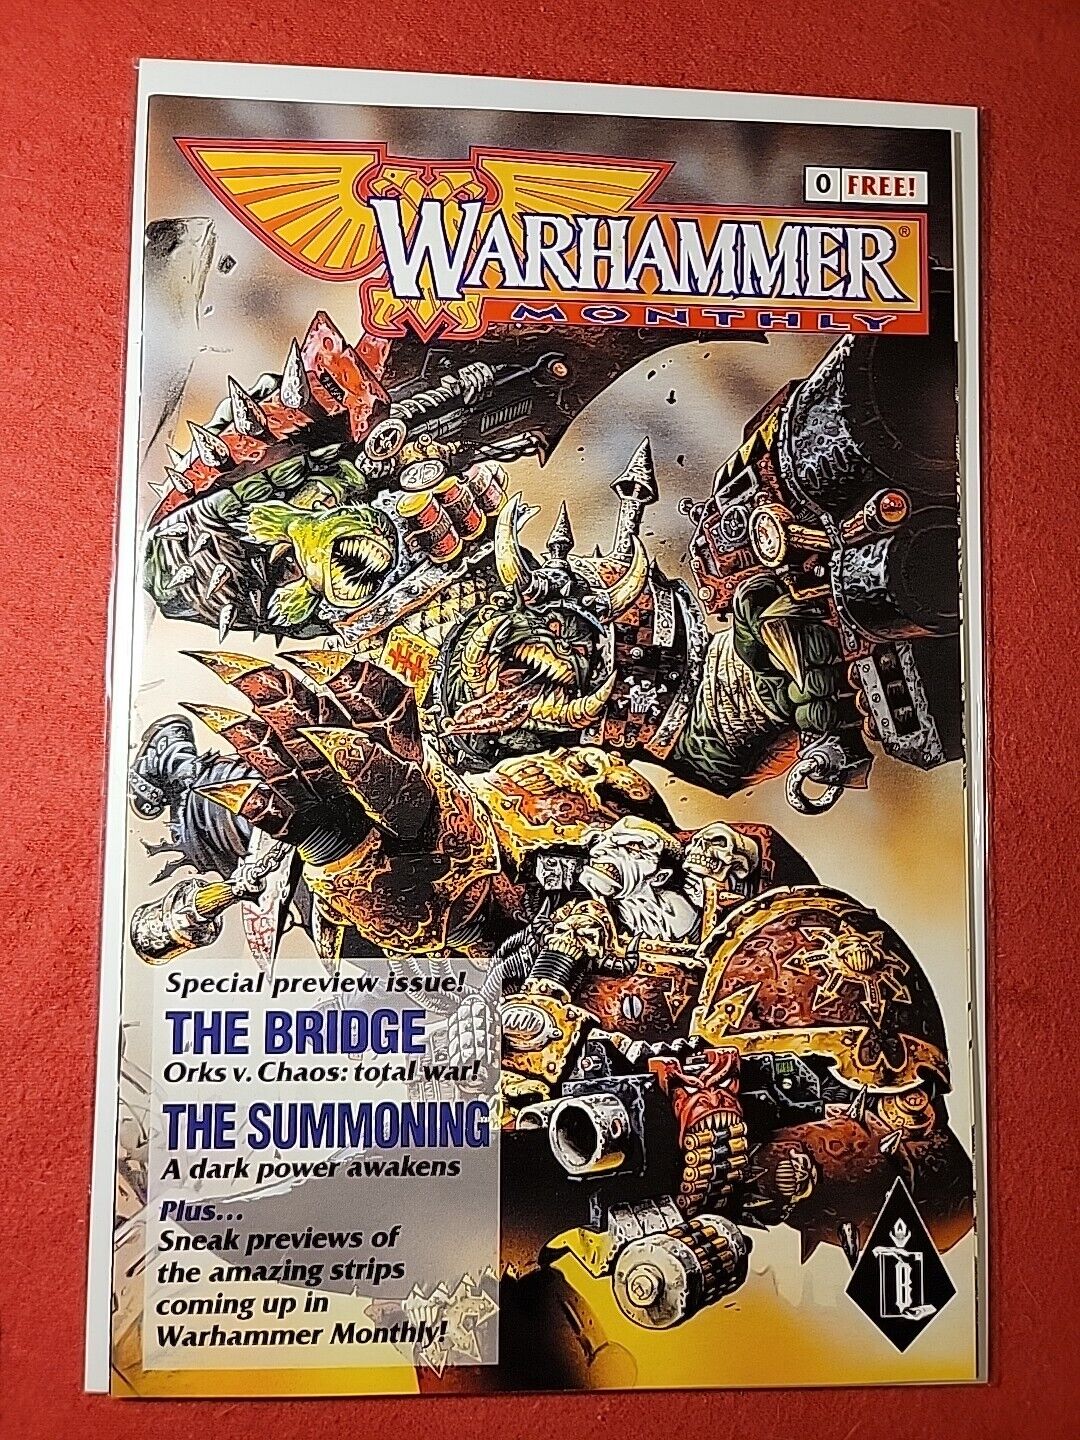 Warhammer Monthly 0 Free Promo Edition Games Workshop Comic Book 